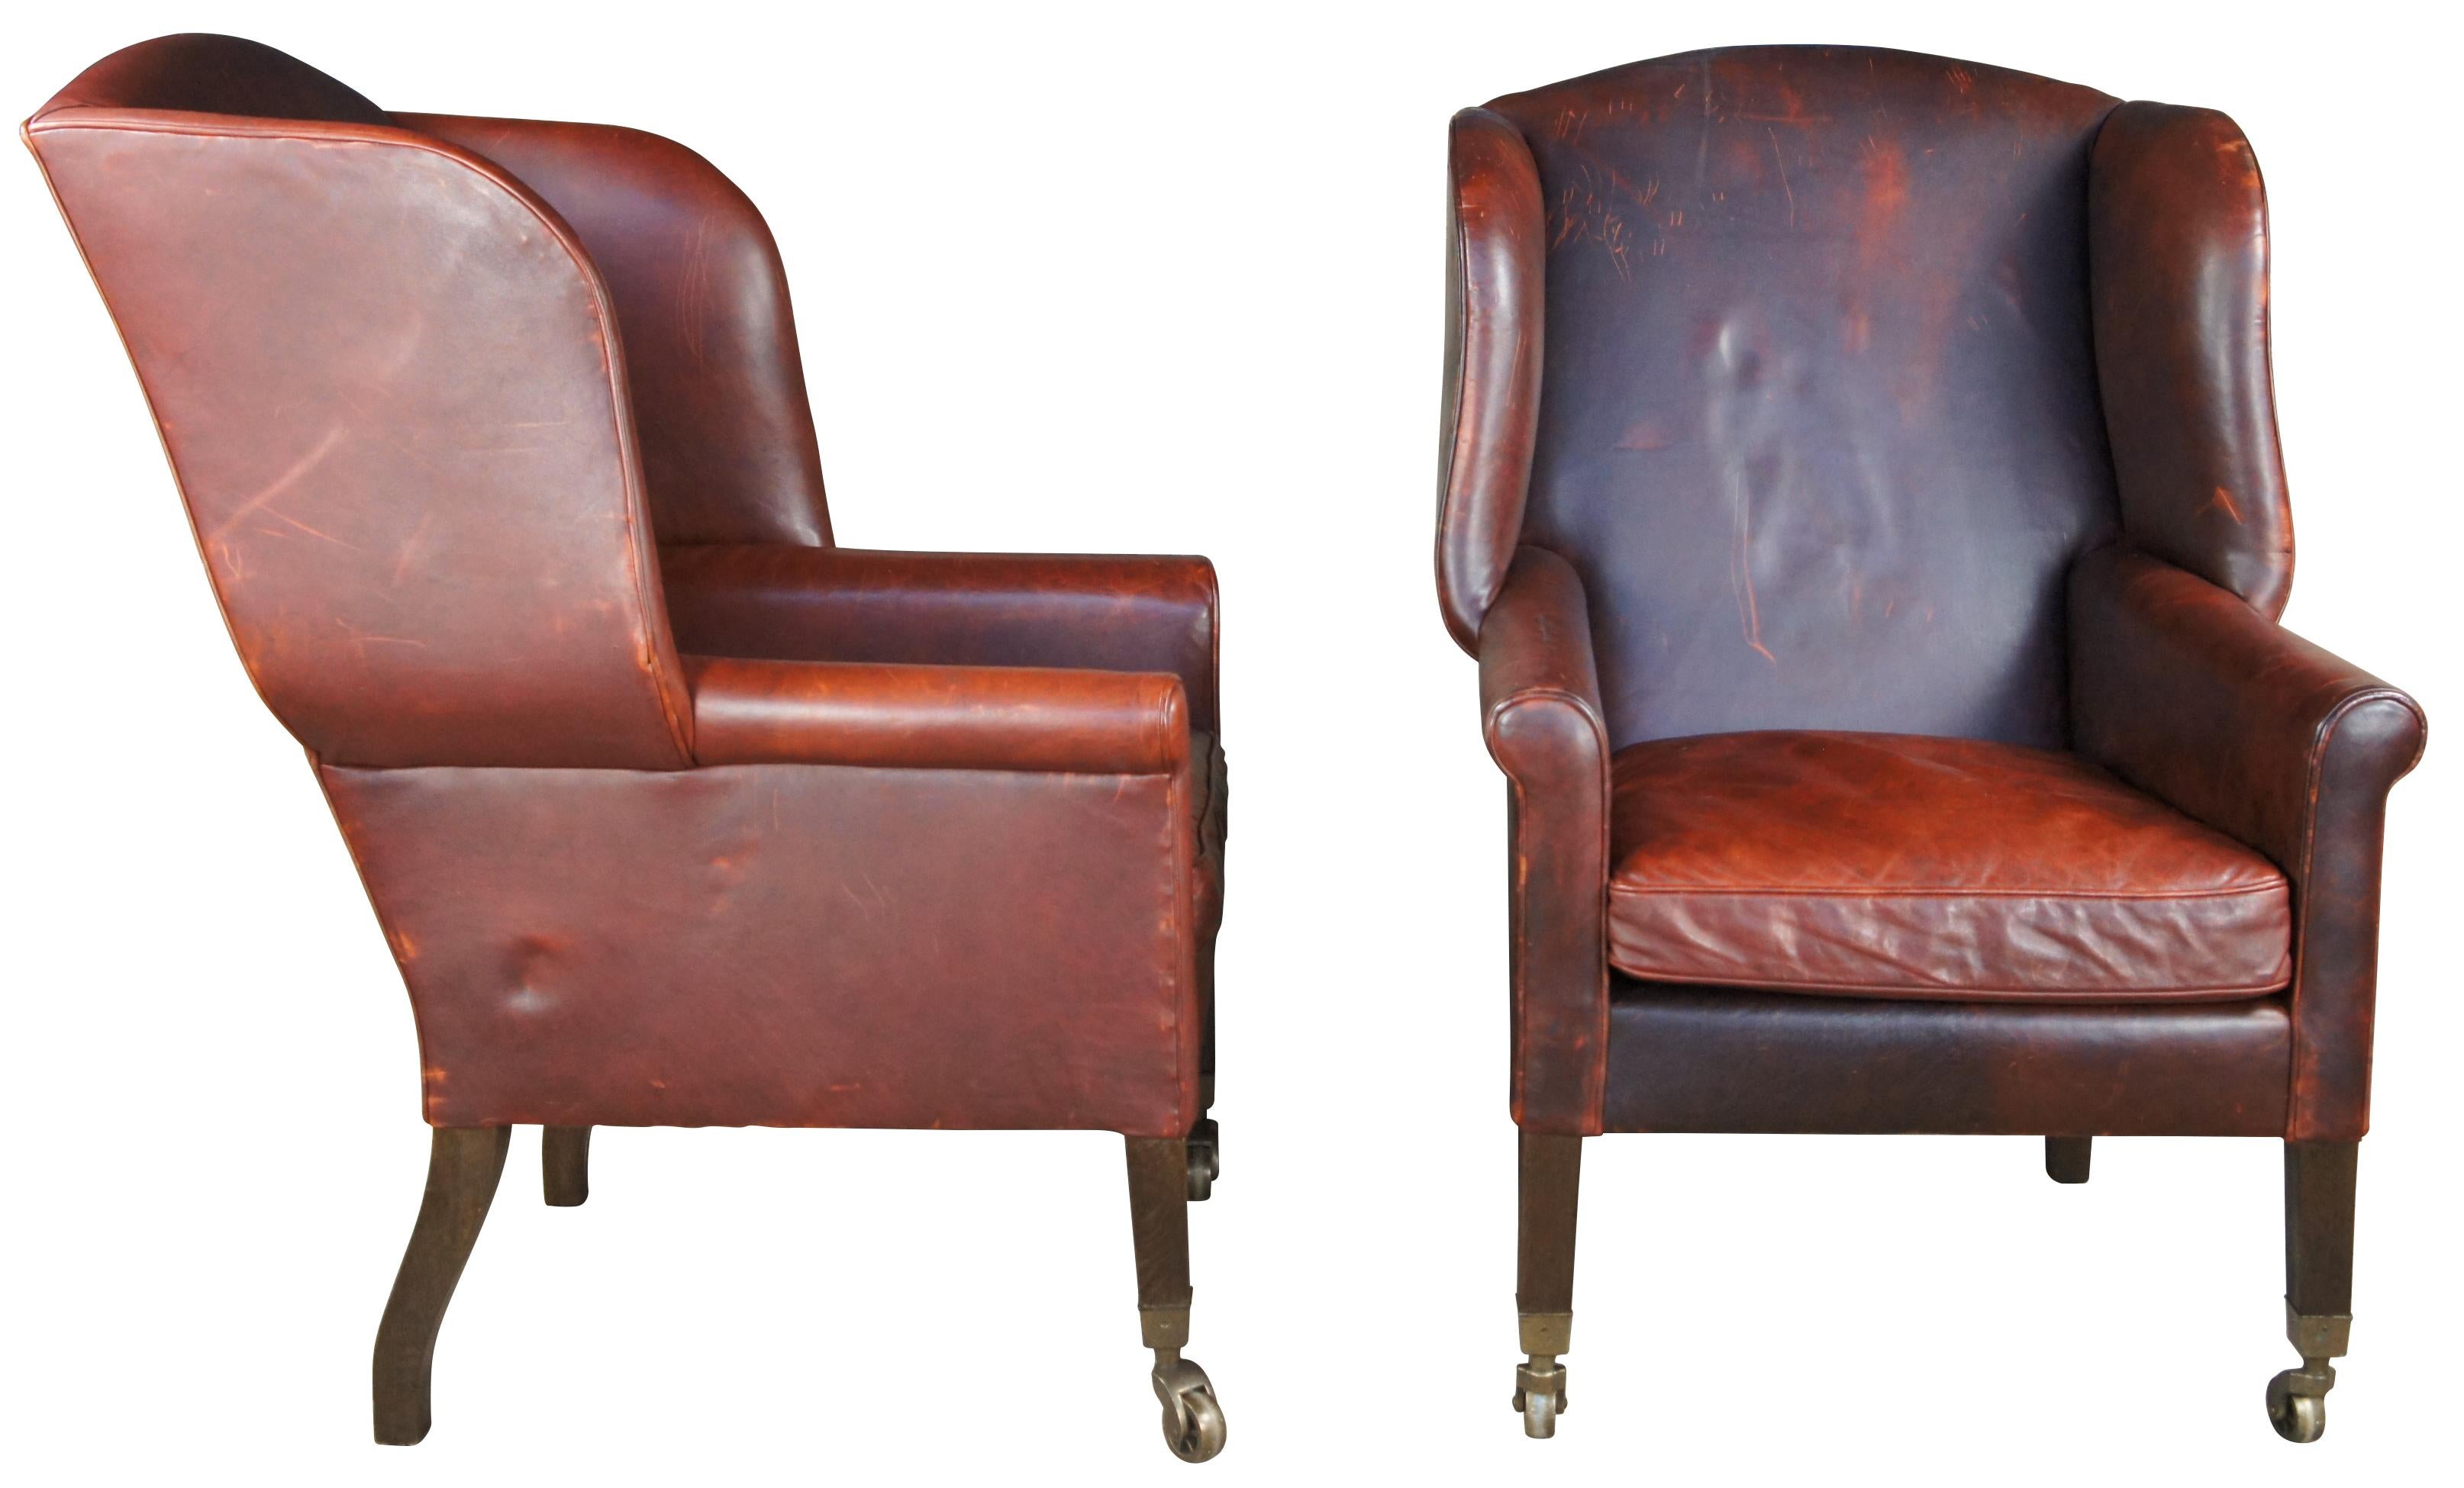 An English 1800s inspired brown leather fireside chair from circa. Features an arched top and deep, sheltering wings down to the swiveling, spoked brass casters, engraved with S Dobbins & Co Patent, Bristol. With low, padded scroll arms and a plump